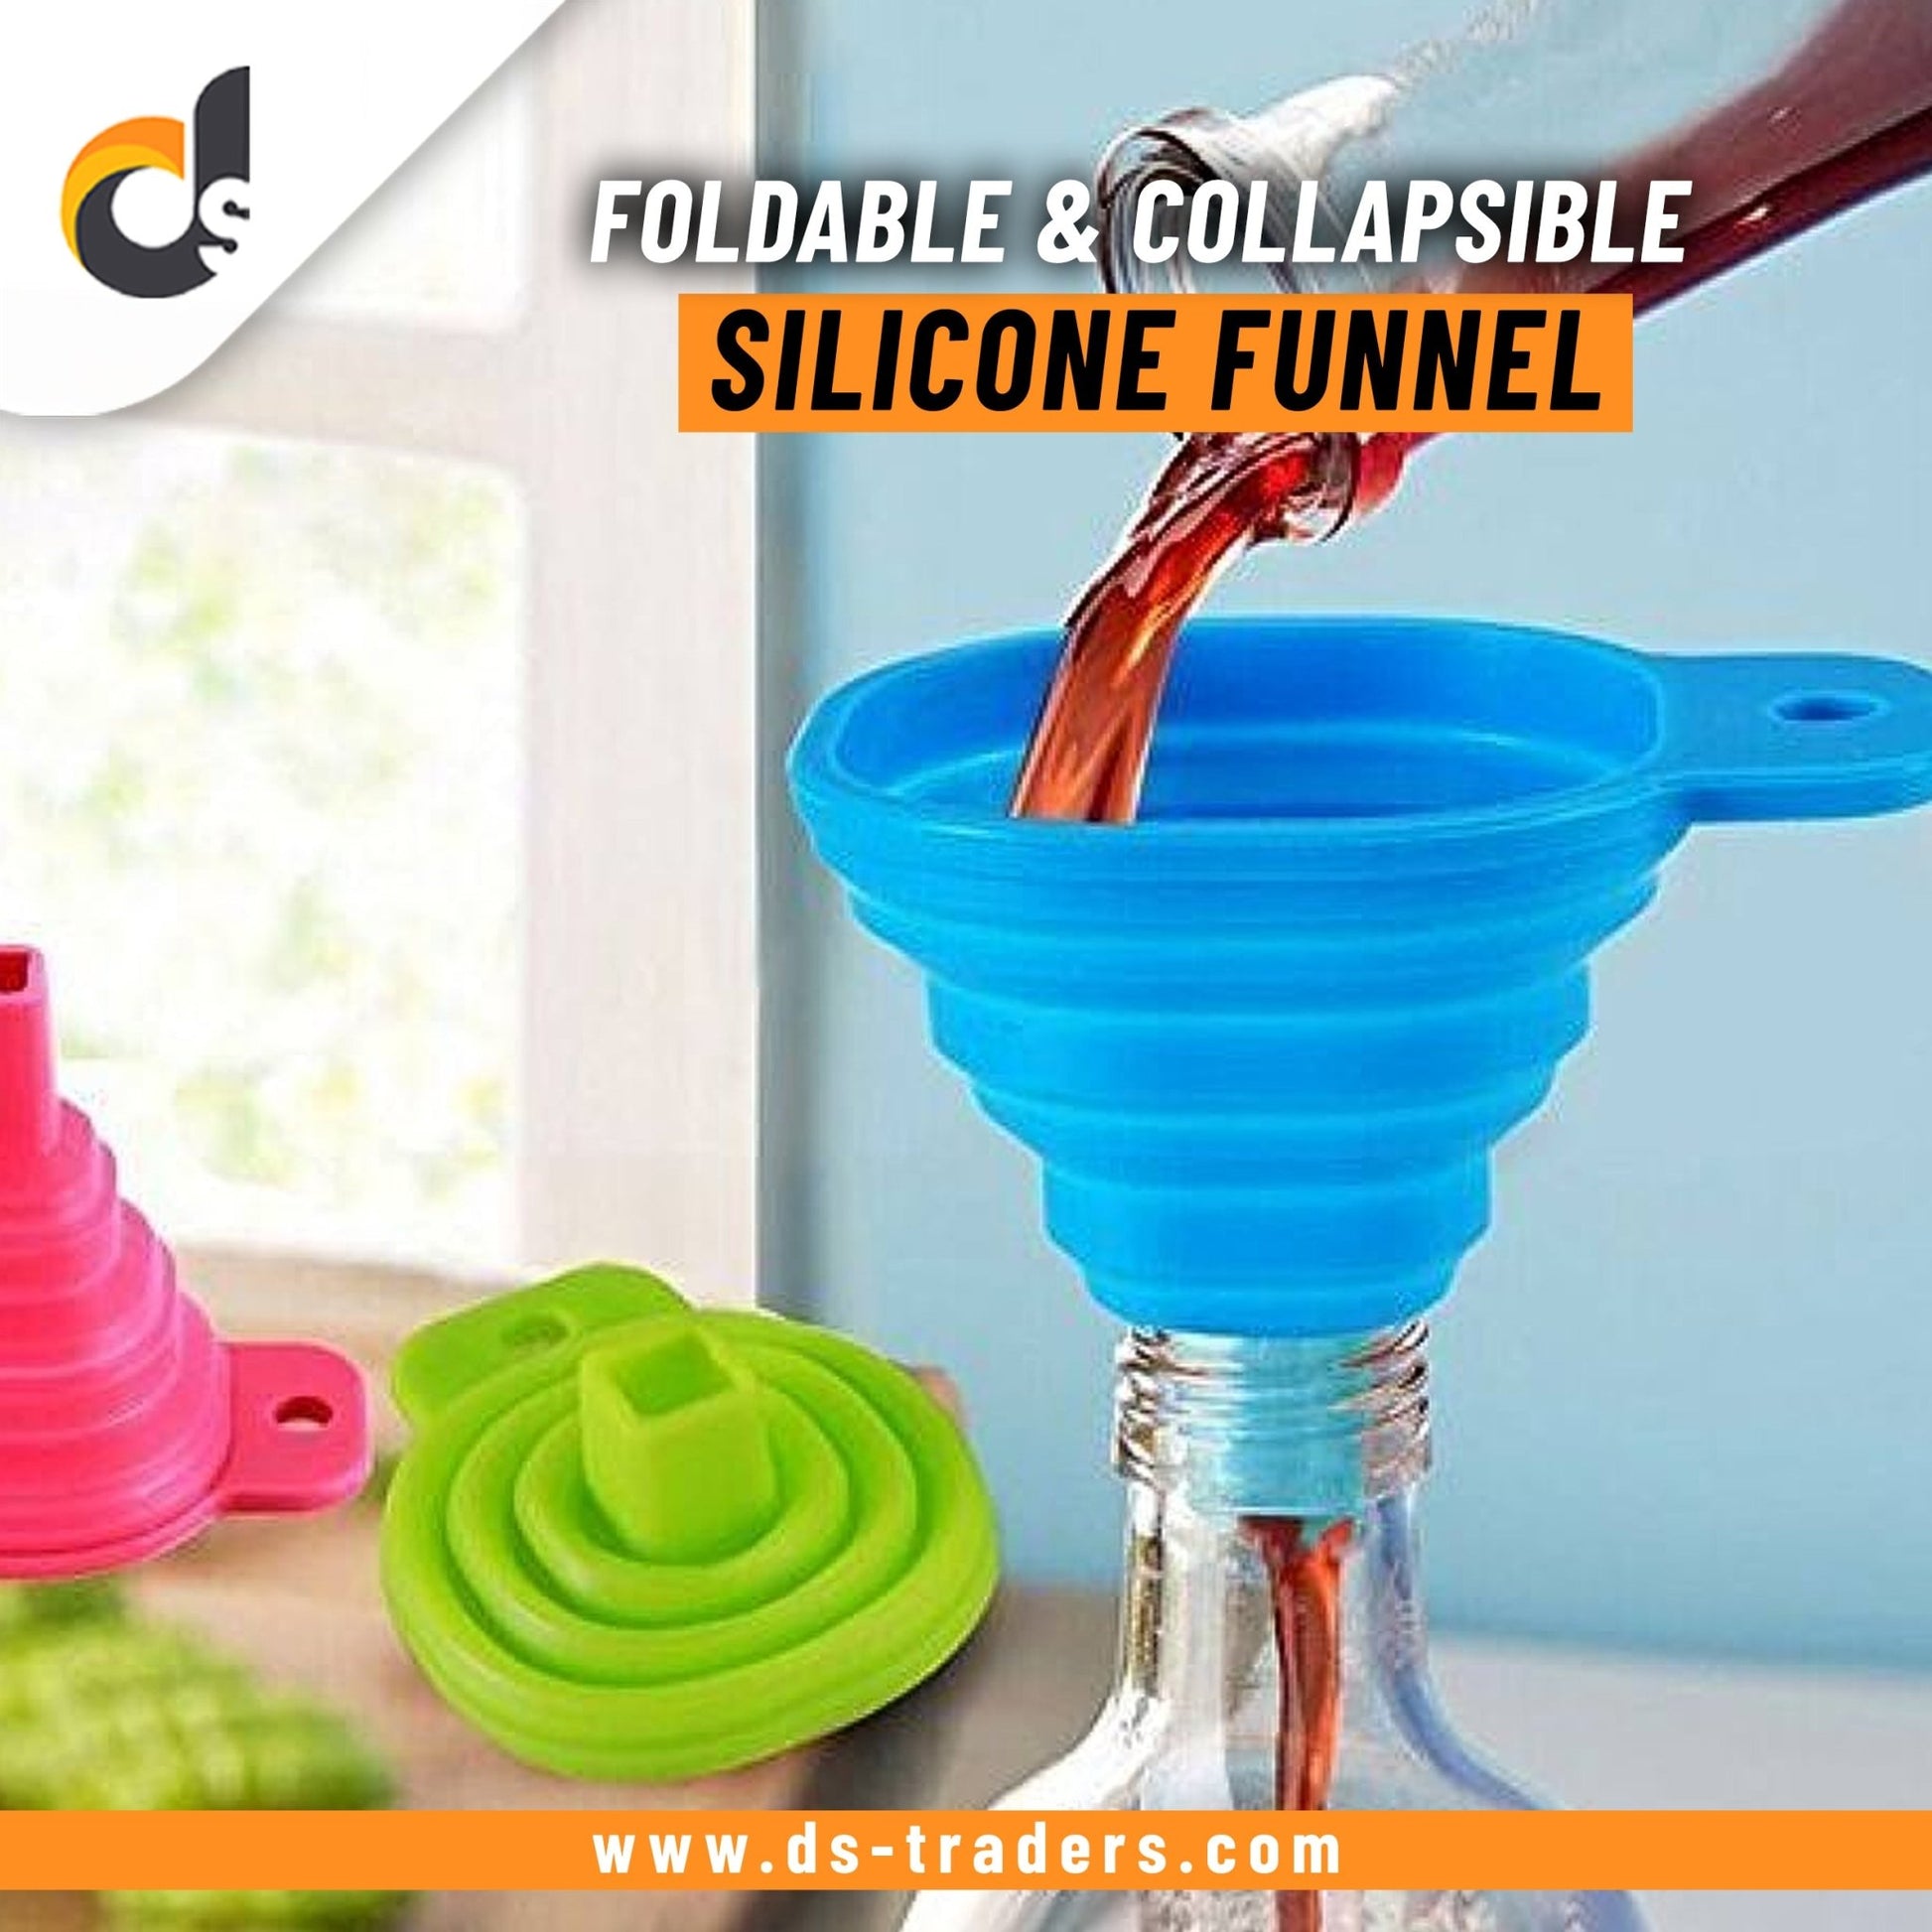 Pack Of 2 - Foldable and Collapsible Silicone Funnel - DS Traders